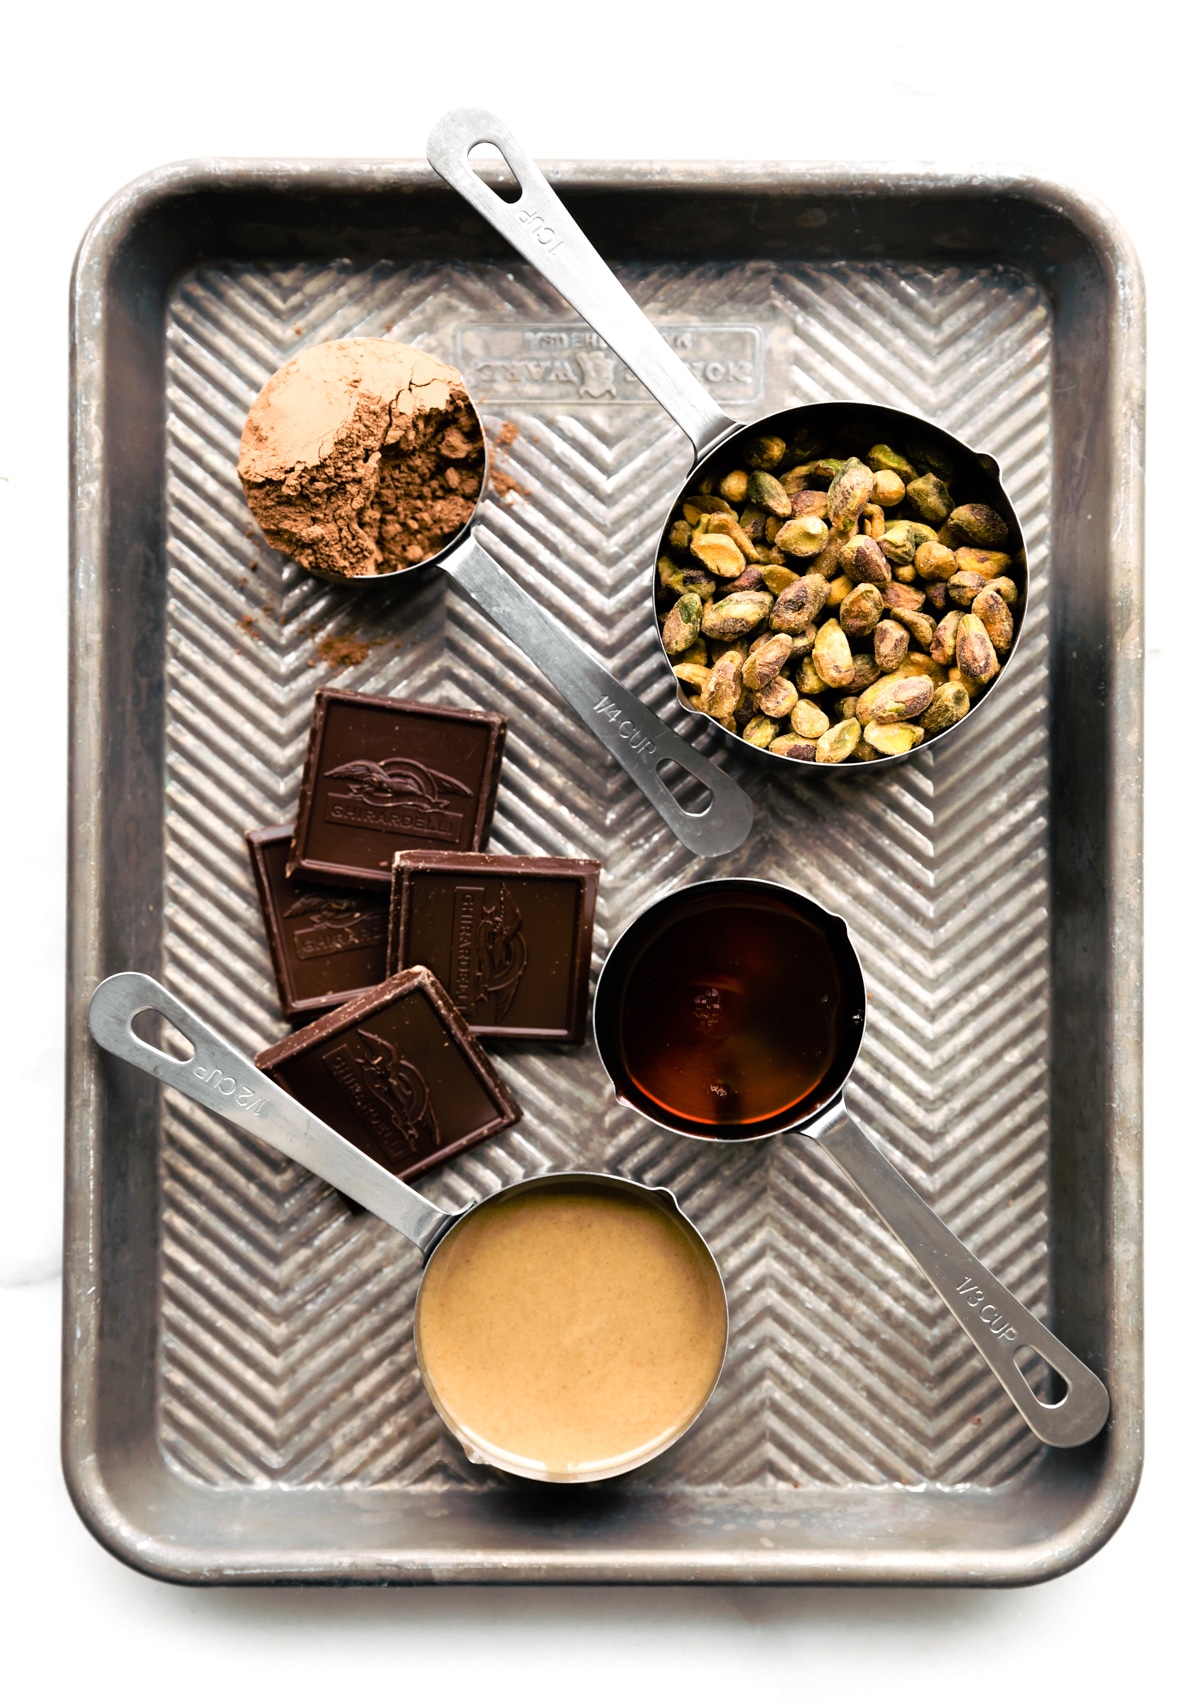 All ingredients for chocolate pistachio protein balls in baking dish in measuring cups.